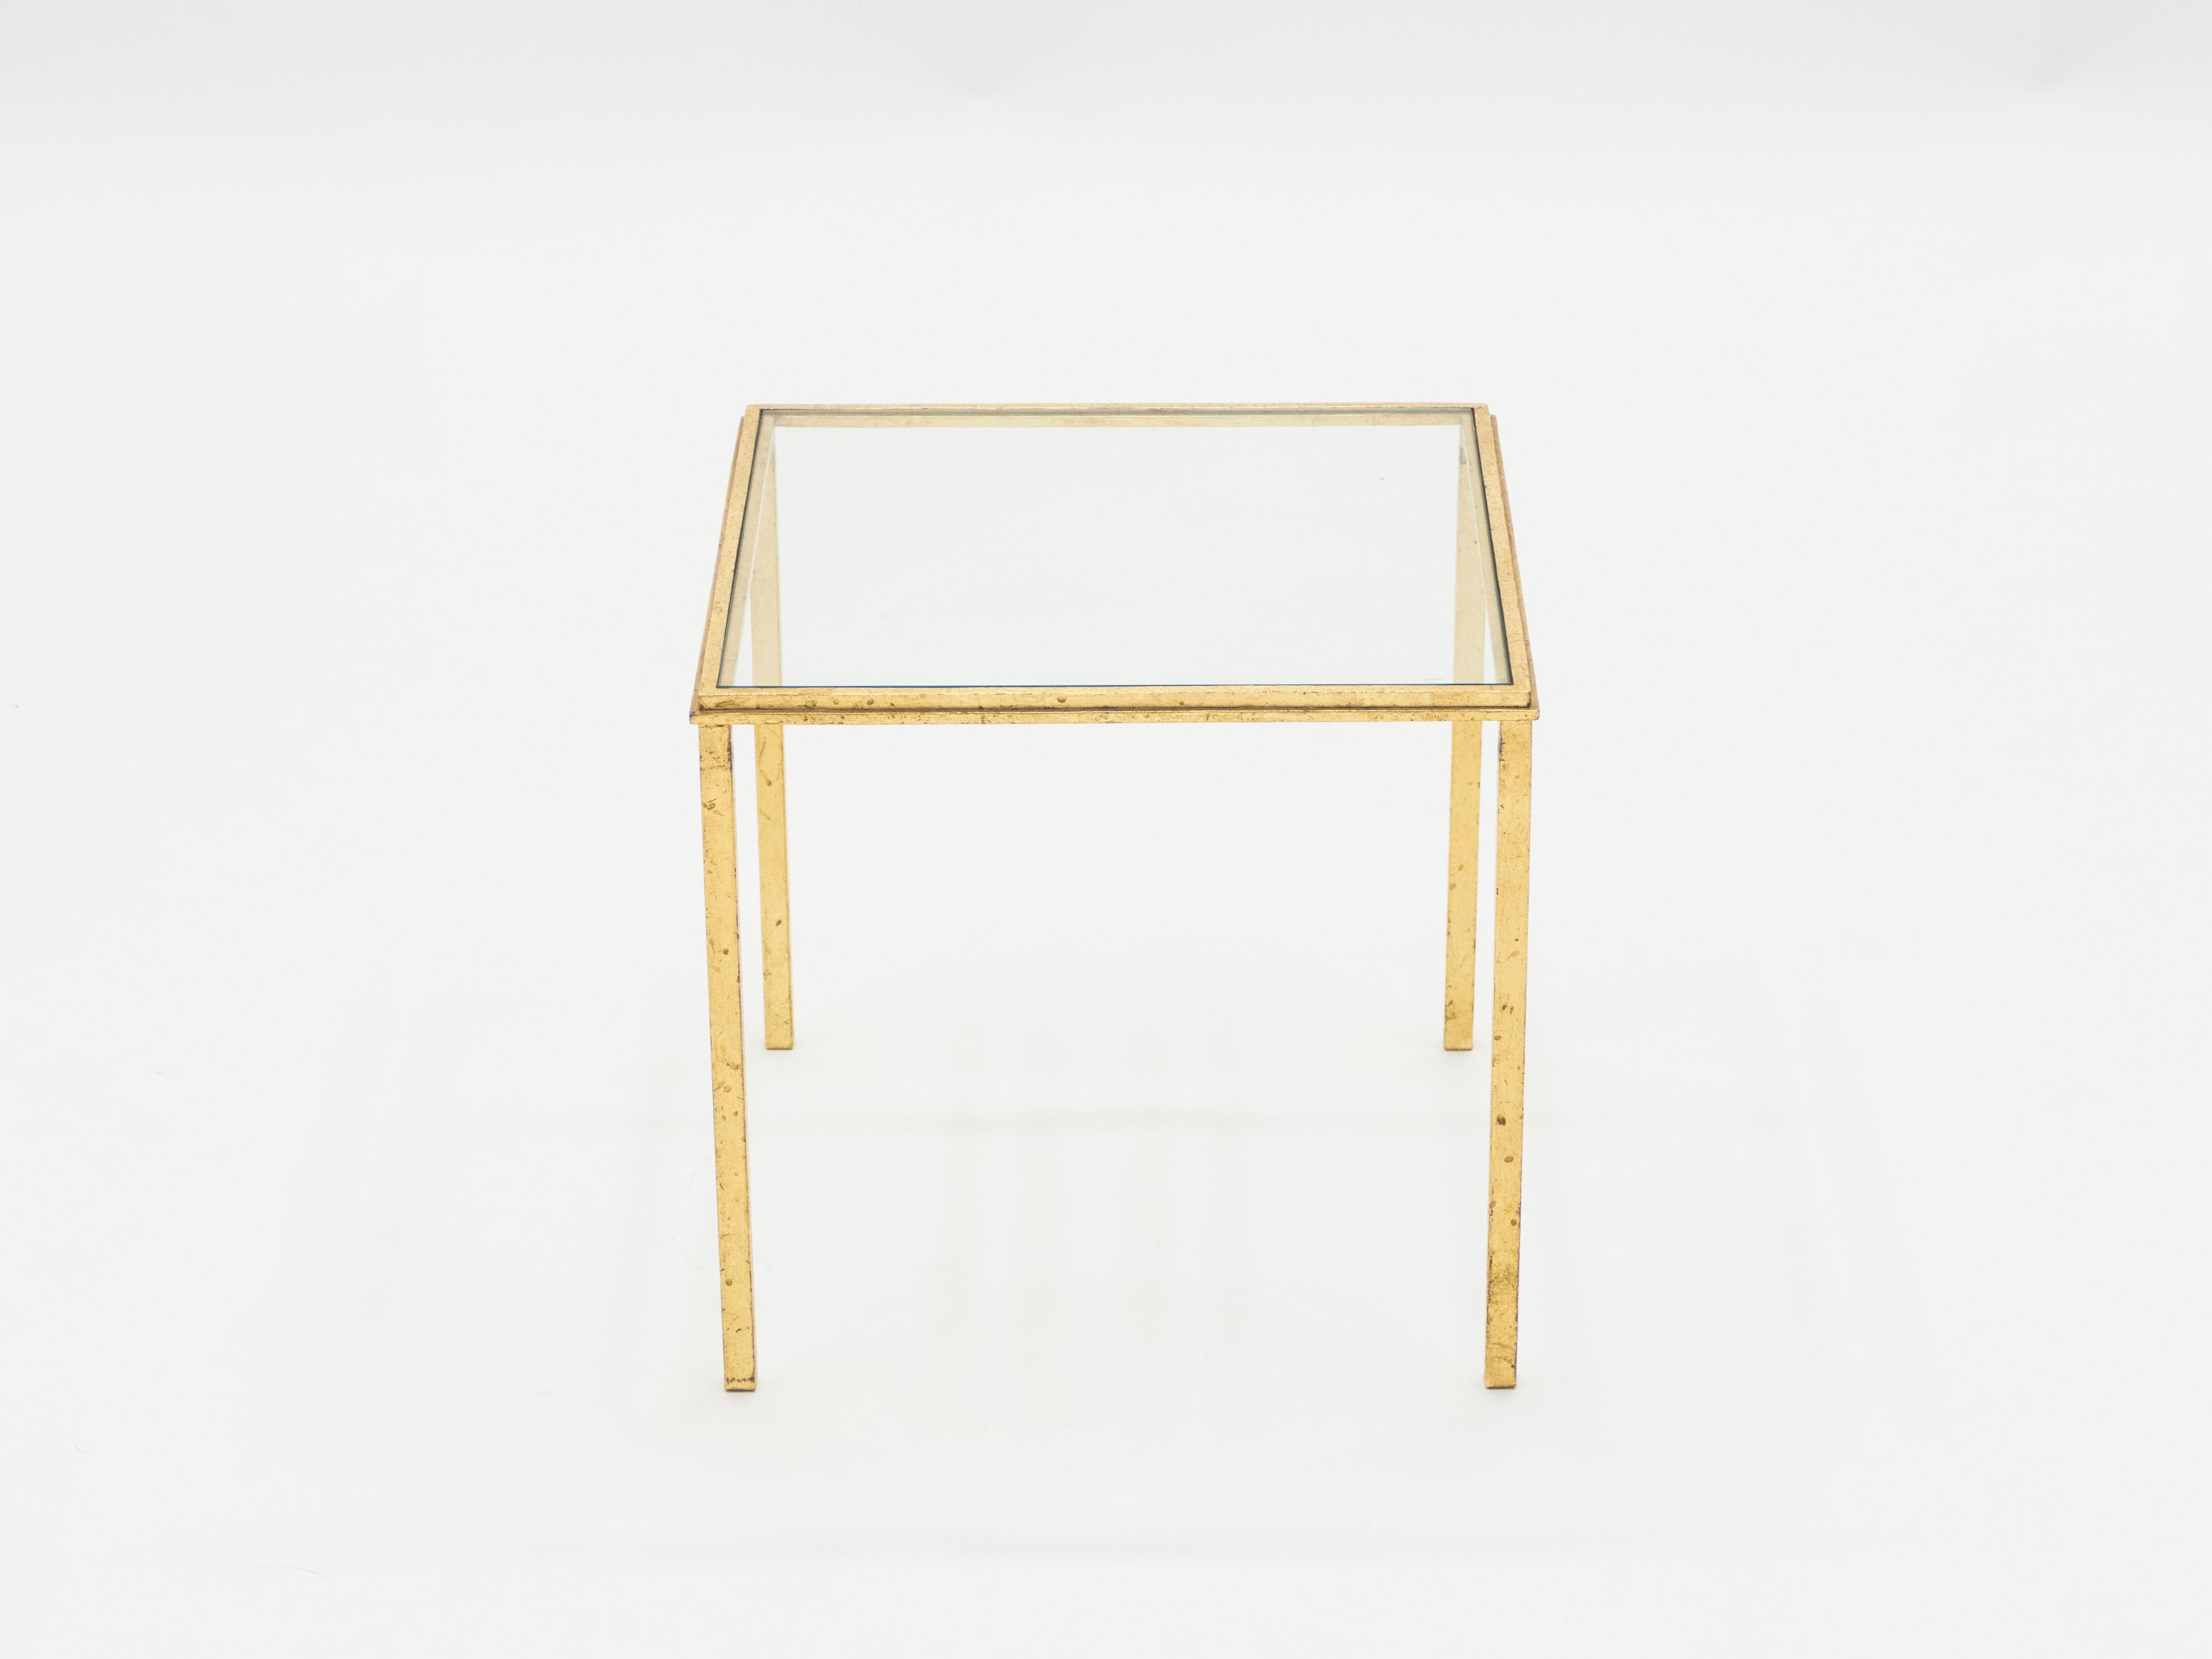 Glass Midcentury Roger Thibier Gilt Wrought Iron Gold Leaf Nesting Tables, 1960s